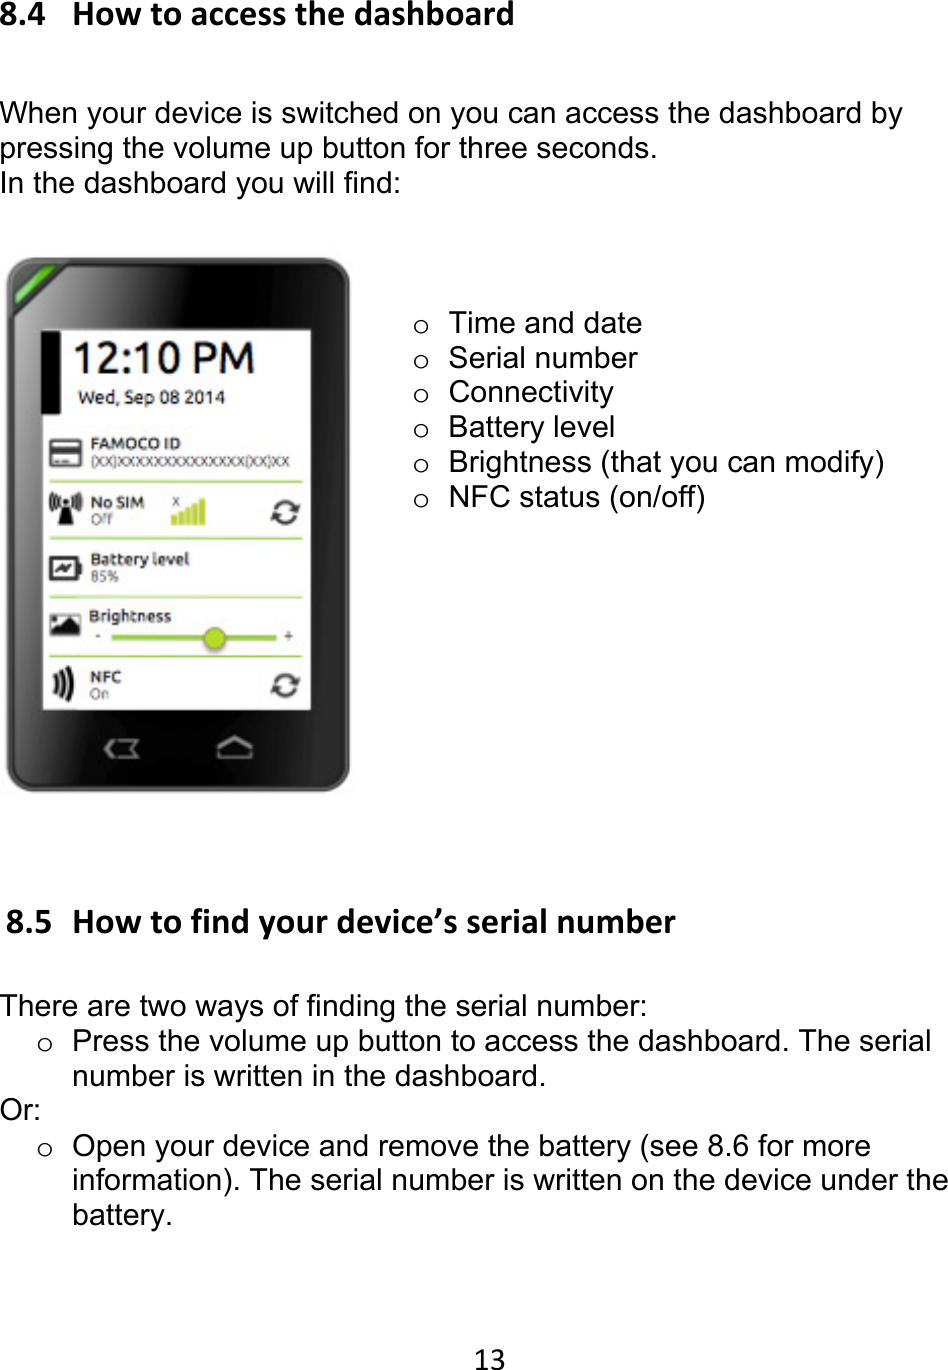 How to find serial number samsung user manual series 7 2